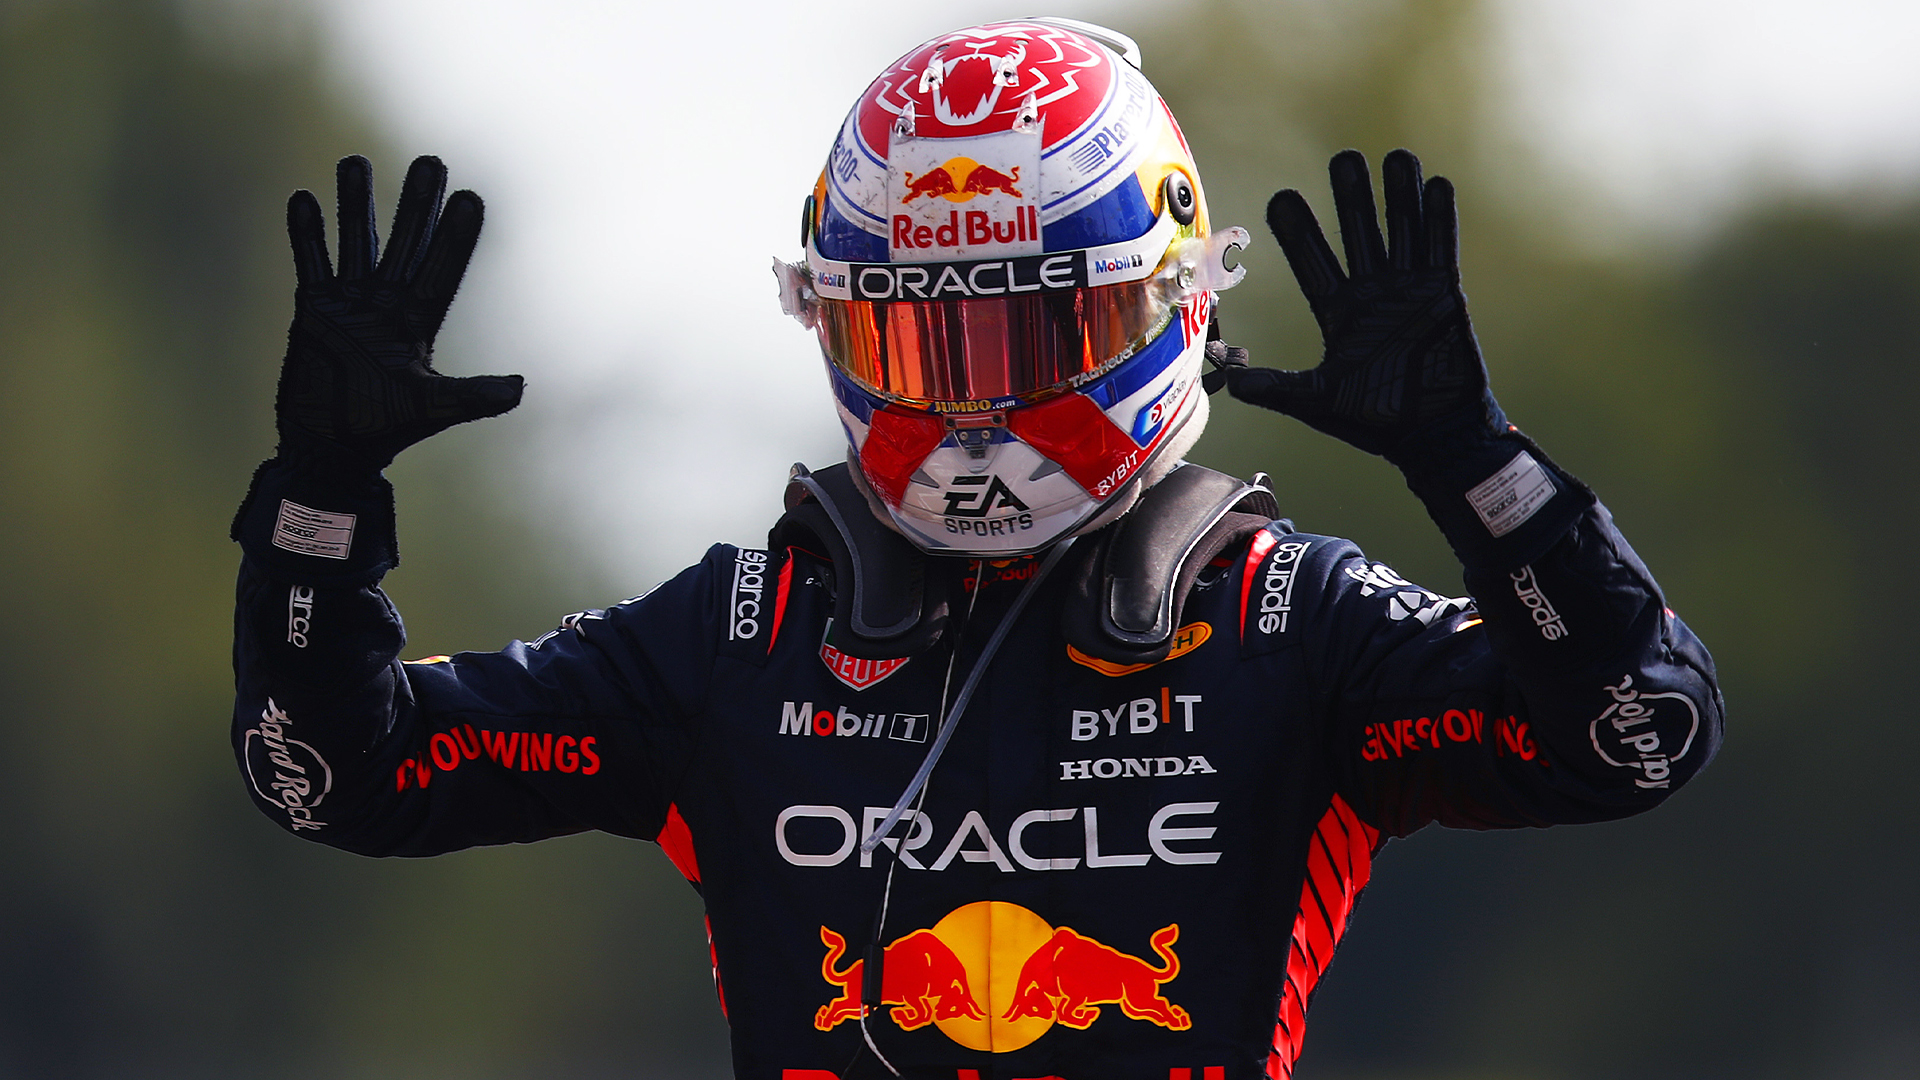 F1s Cost Cap Controversy Settled, Red Bull Still Dominating